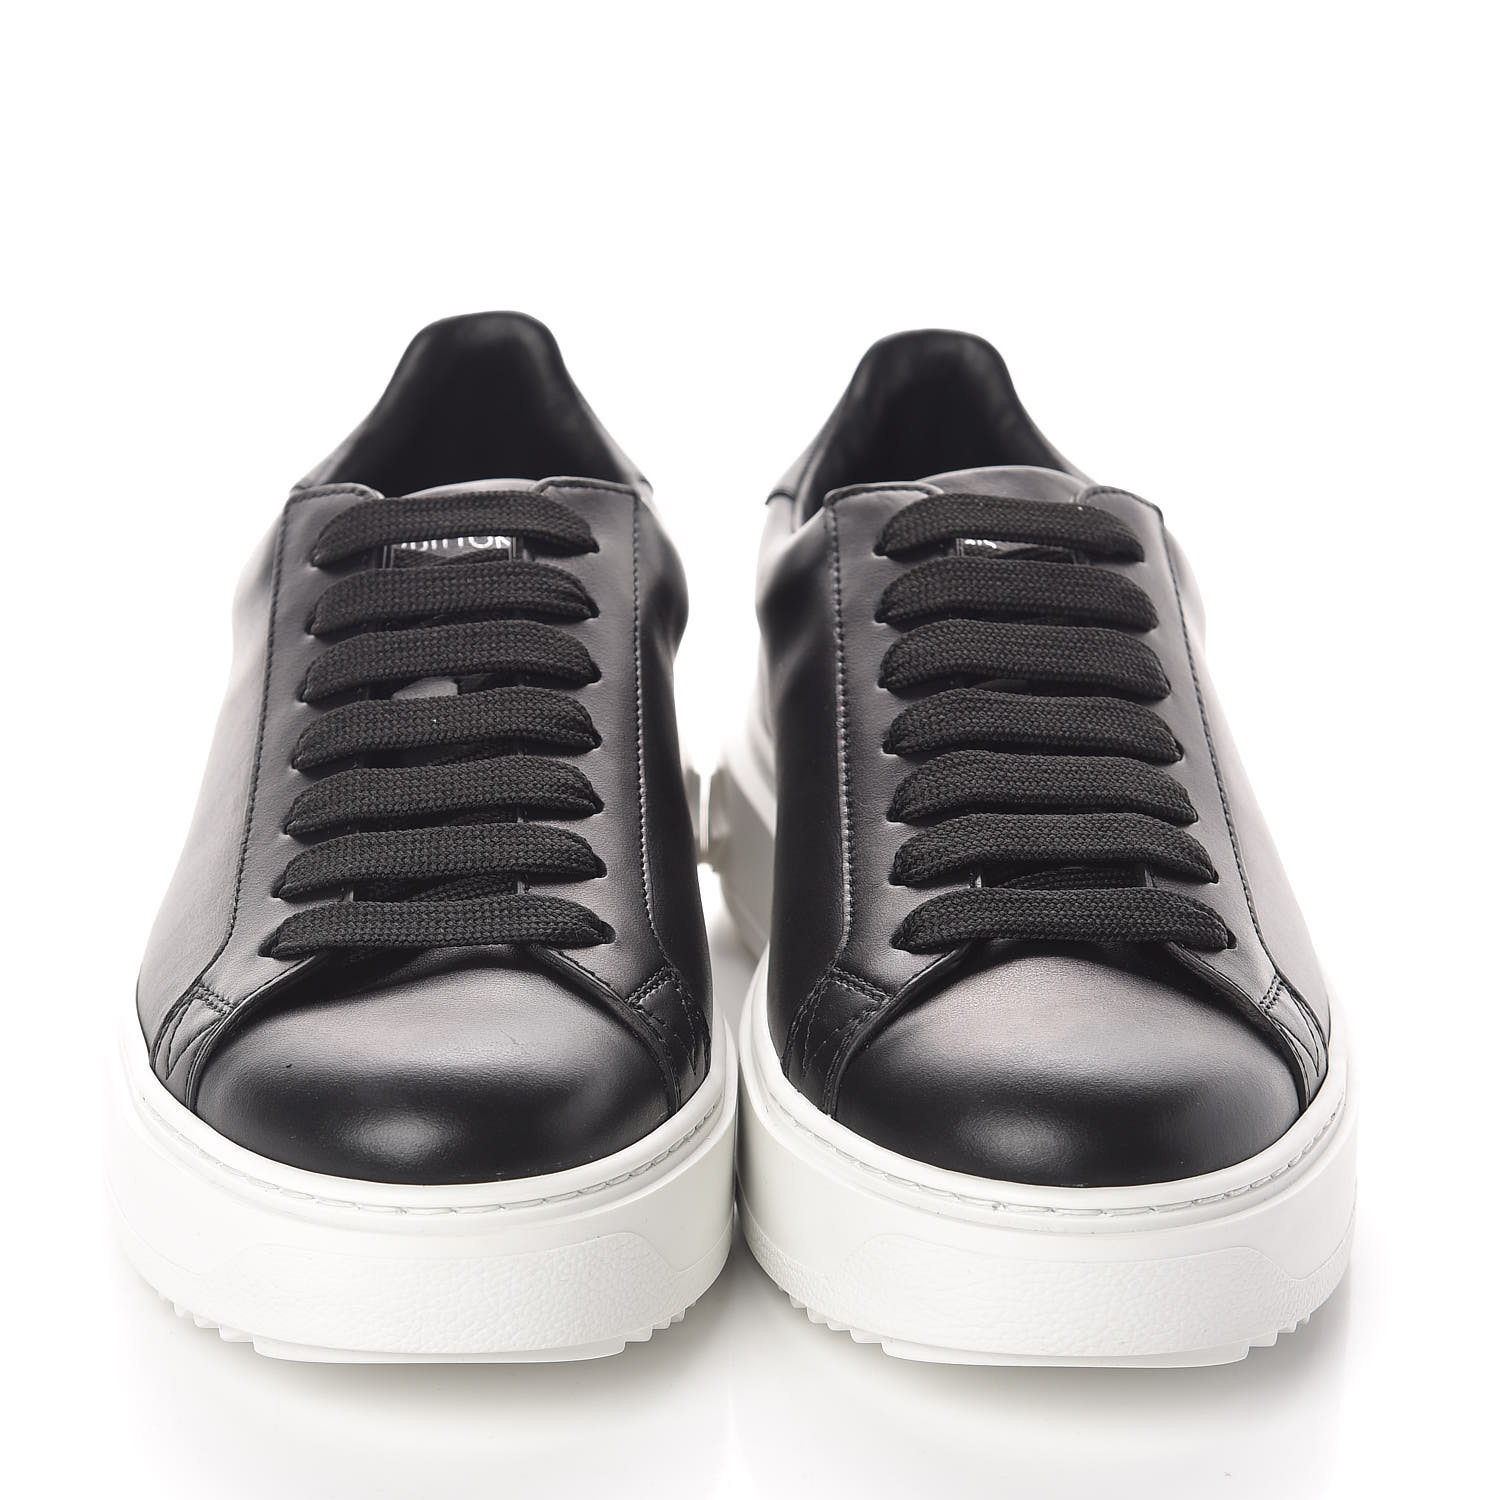 LOUIS VUITTON Calfskin Womens Time Out Sneakers 38 Black 499019